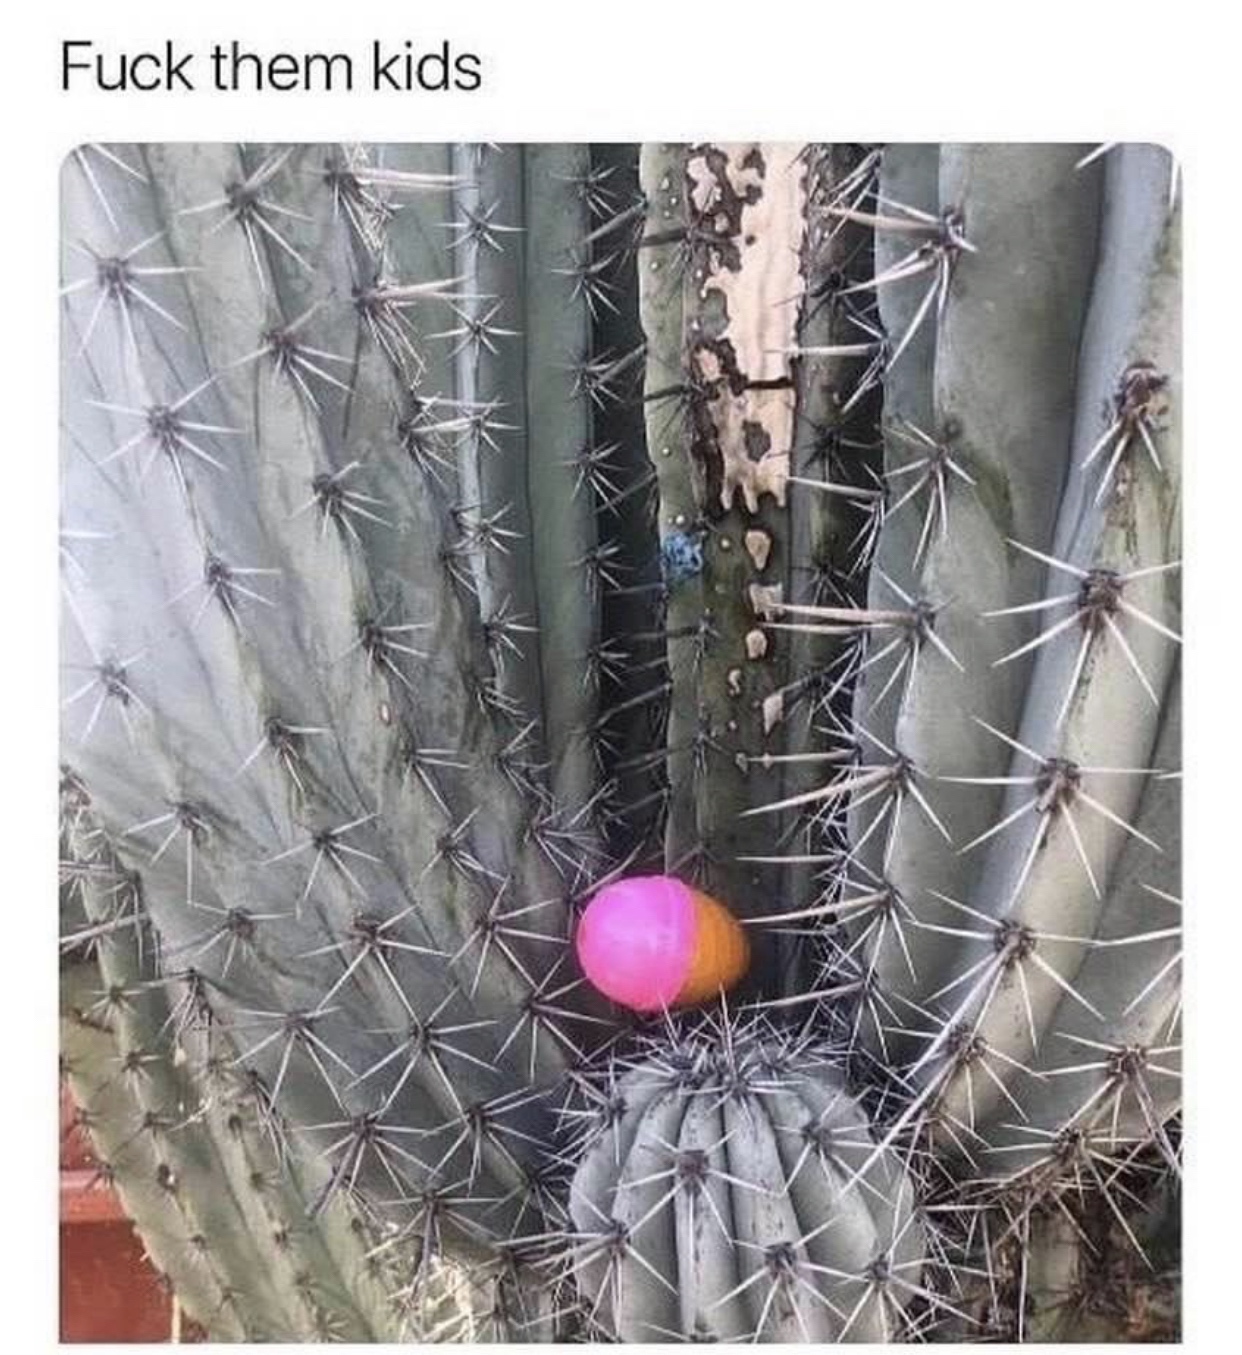 thorns spines and prickles - Fuck them kids